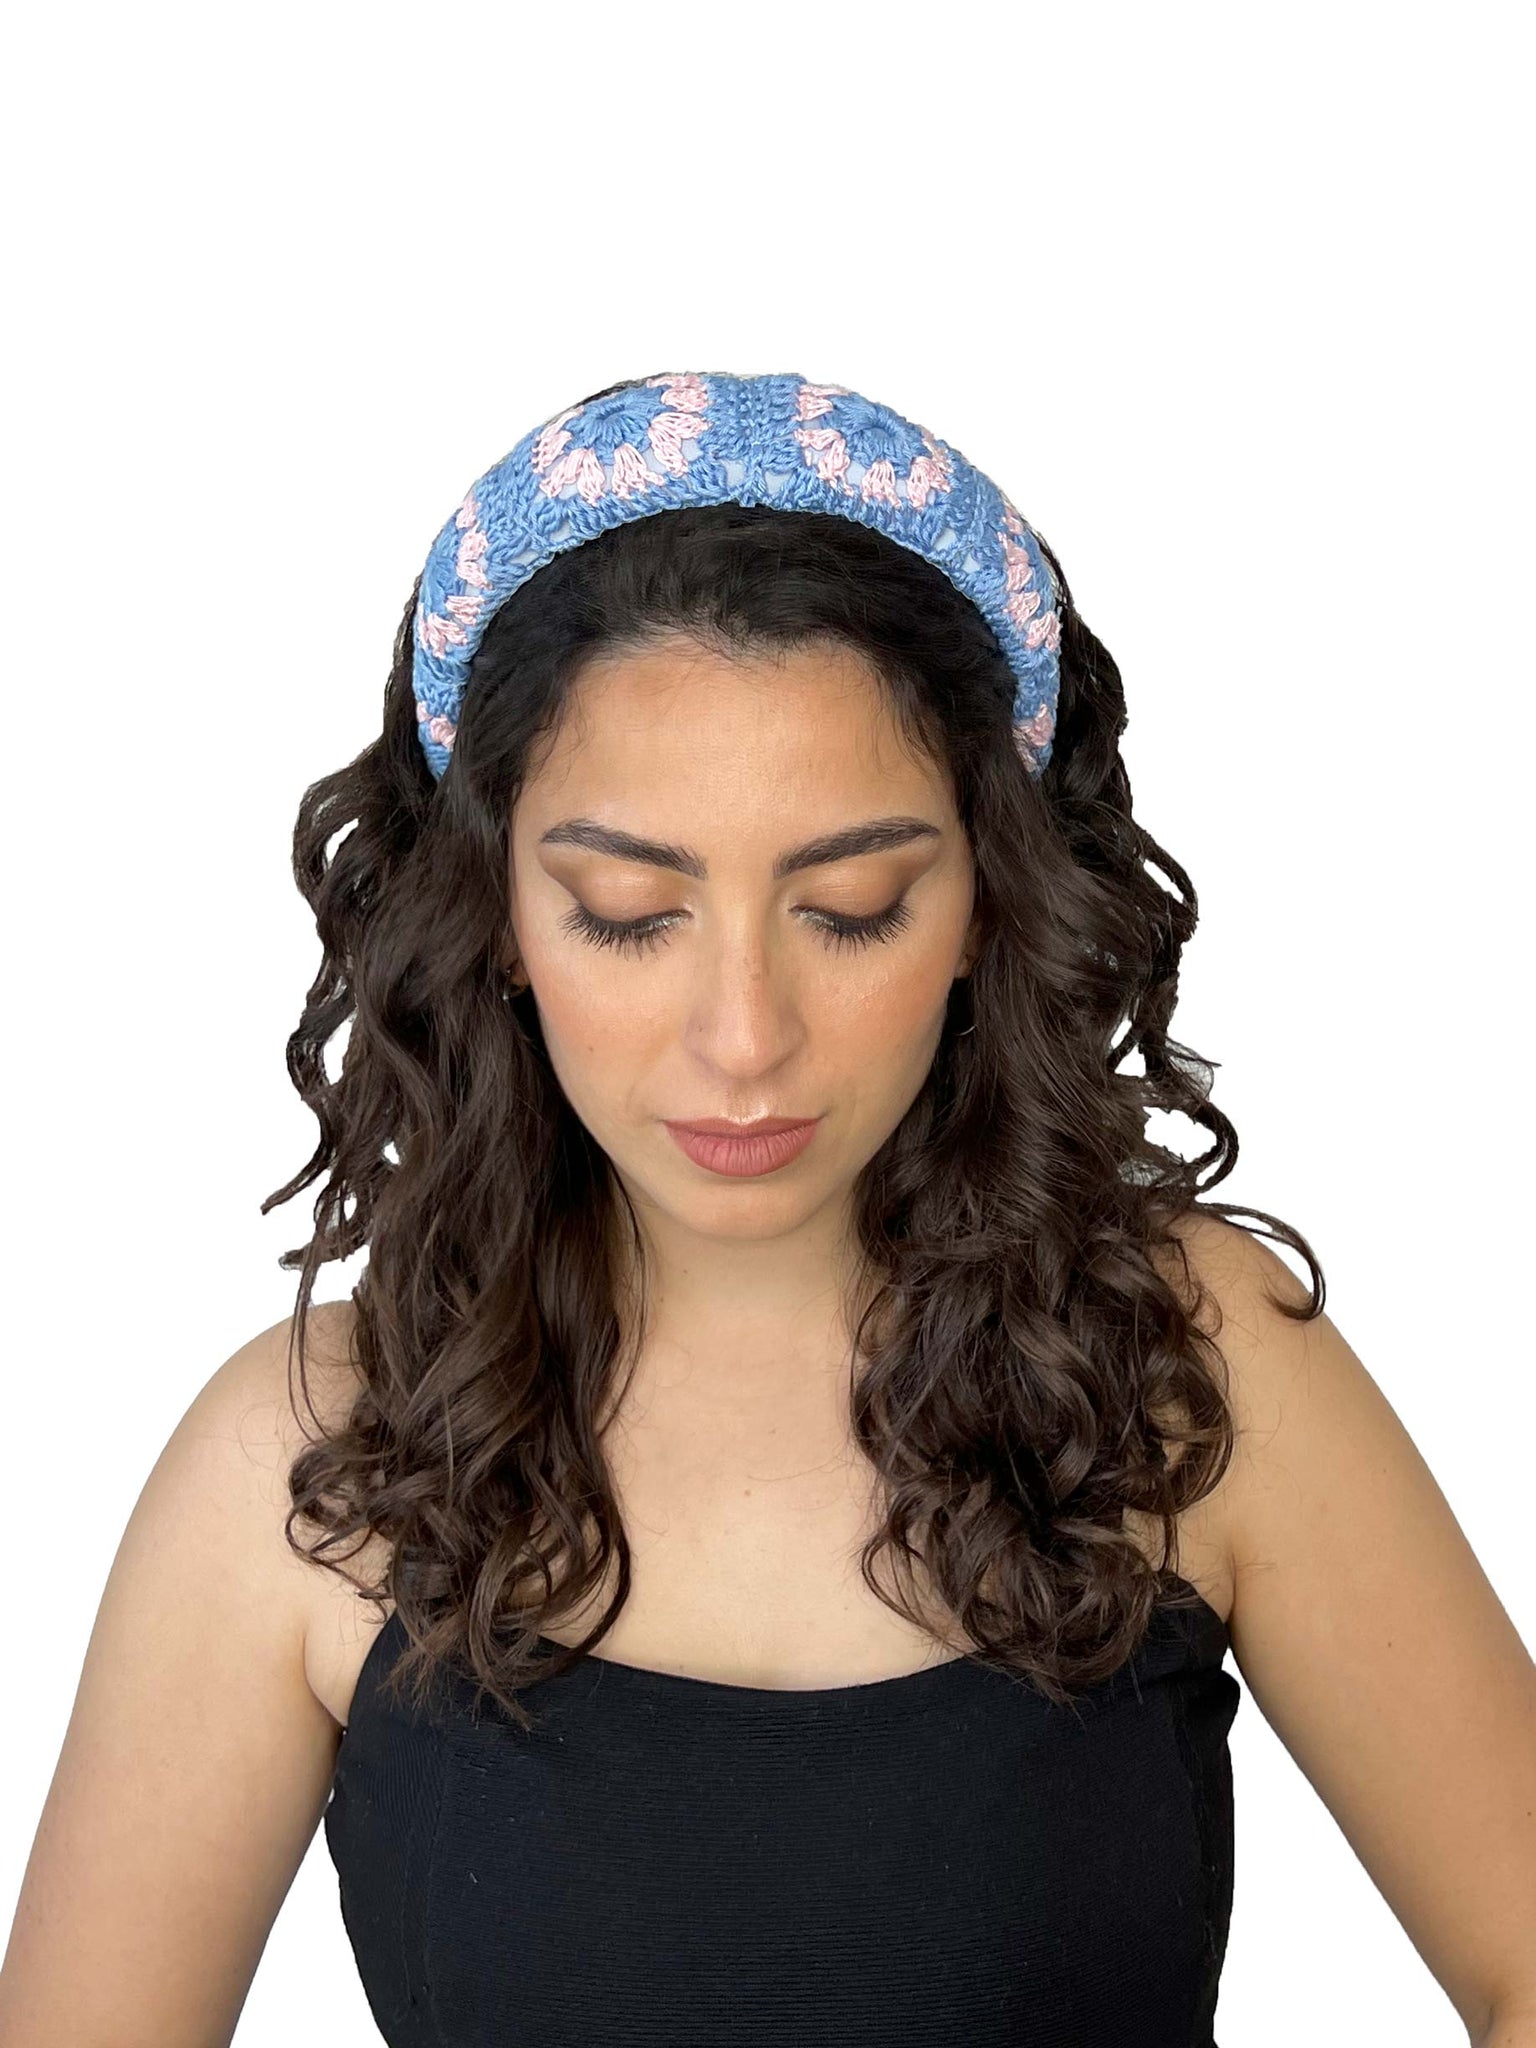 Light blue and pink crochet hairband